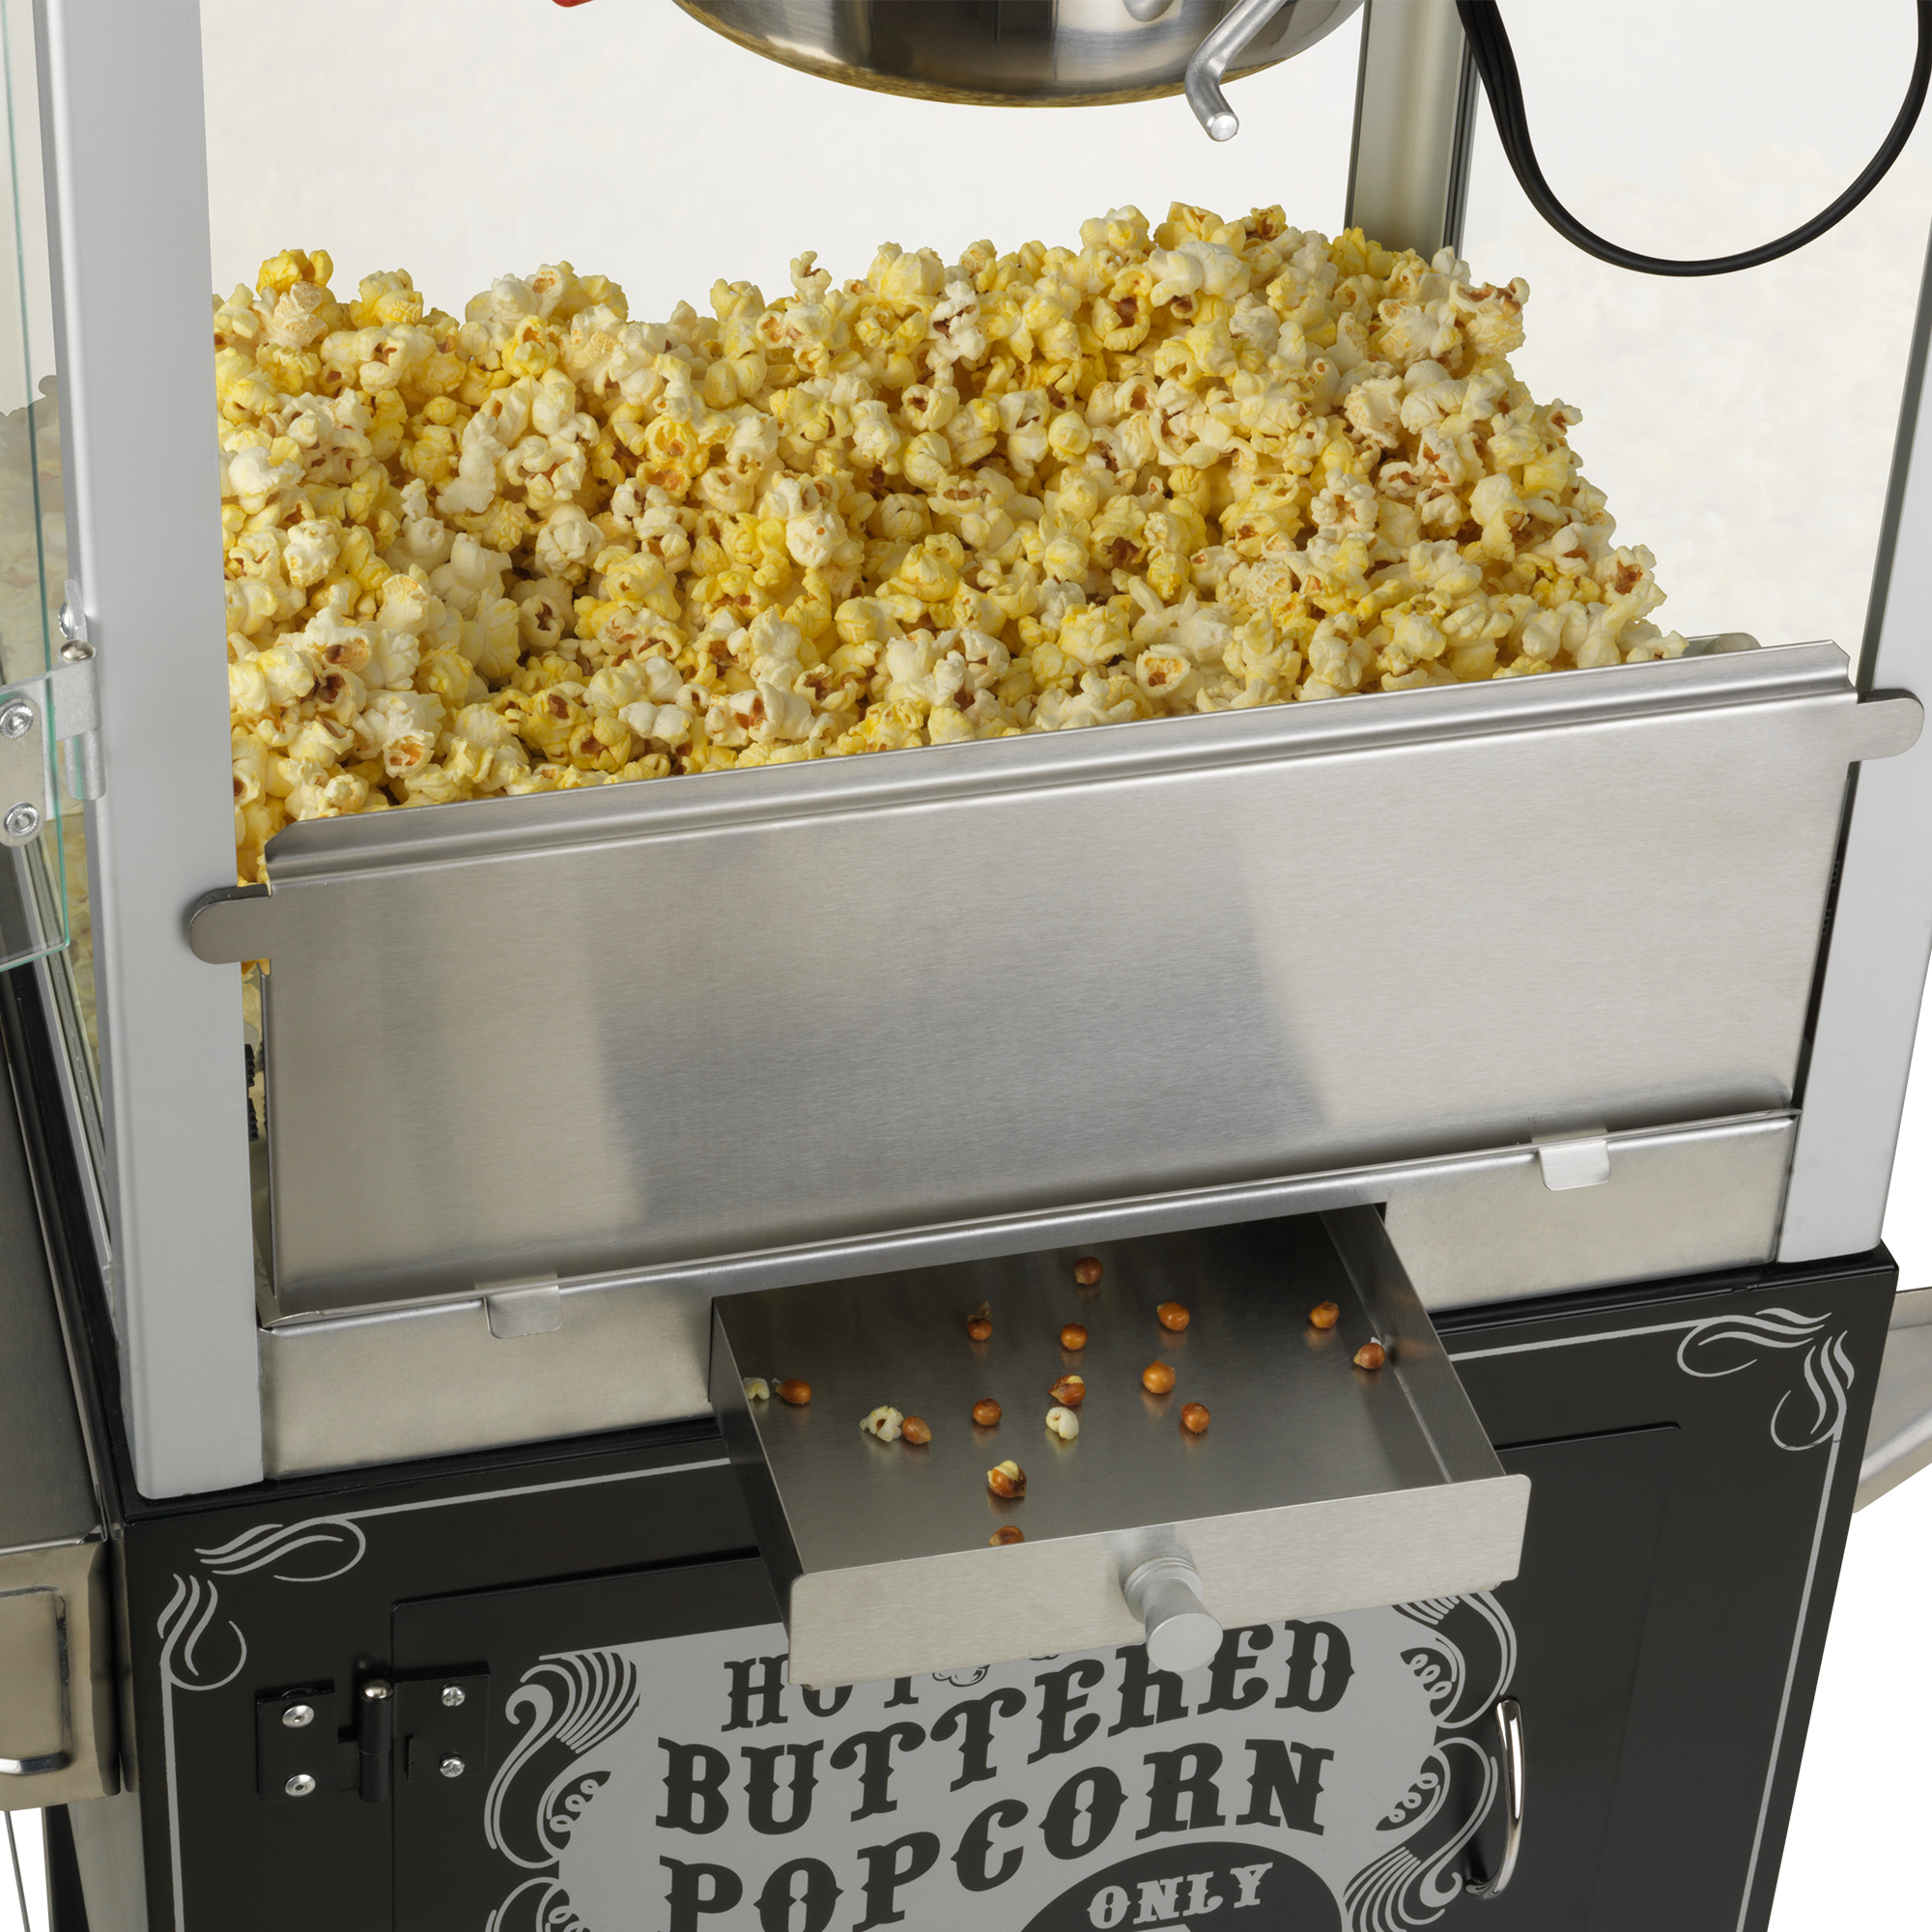 Full Size Carnival Style 8 oz Popcorn Maker Machine with cart, Black and  Silver 